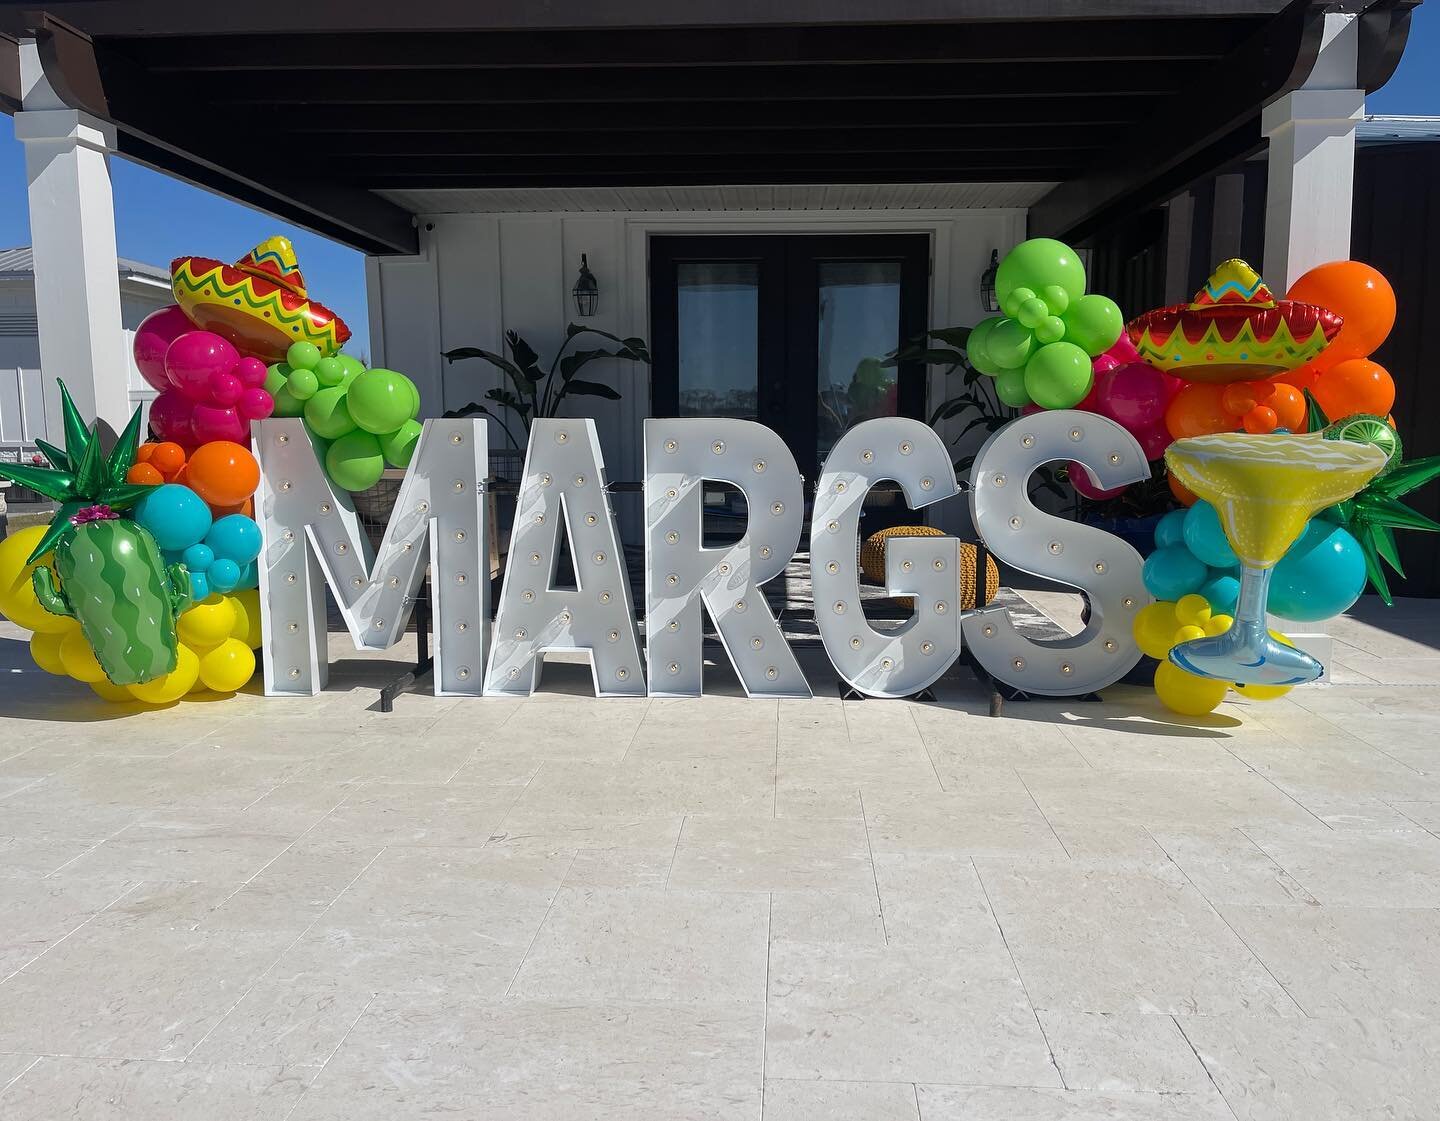 Catch us pool side this upcoming summer with MARGS in our hands! 
Need marquee lights! Holla at us! We got YOU! 
#balloons #balloongarland #events #eventplanner #celebrate #birthdays #eventstylist #bachelorette #foils #marqueelights #party #bestweeke